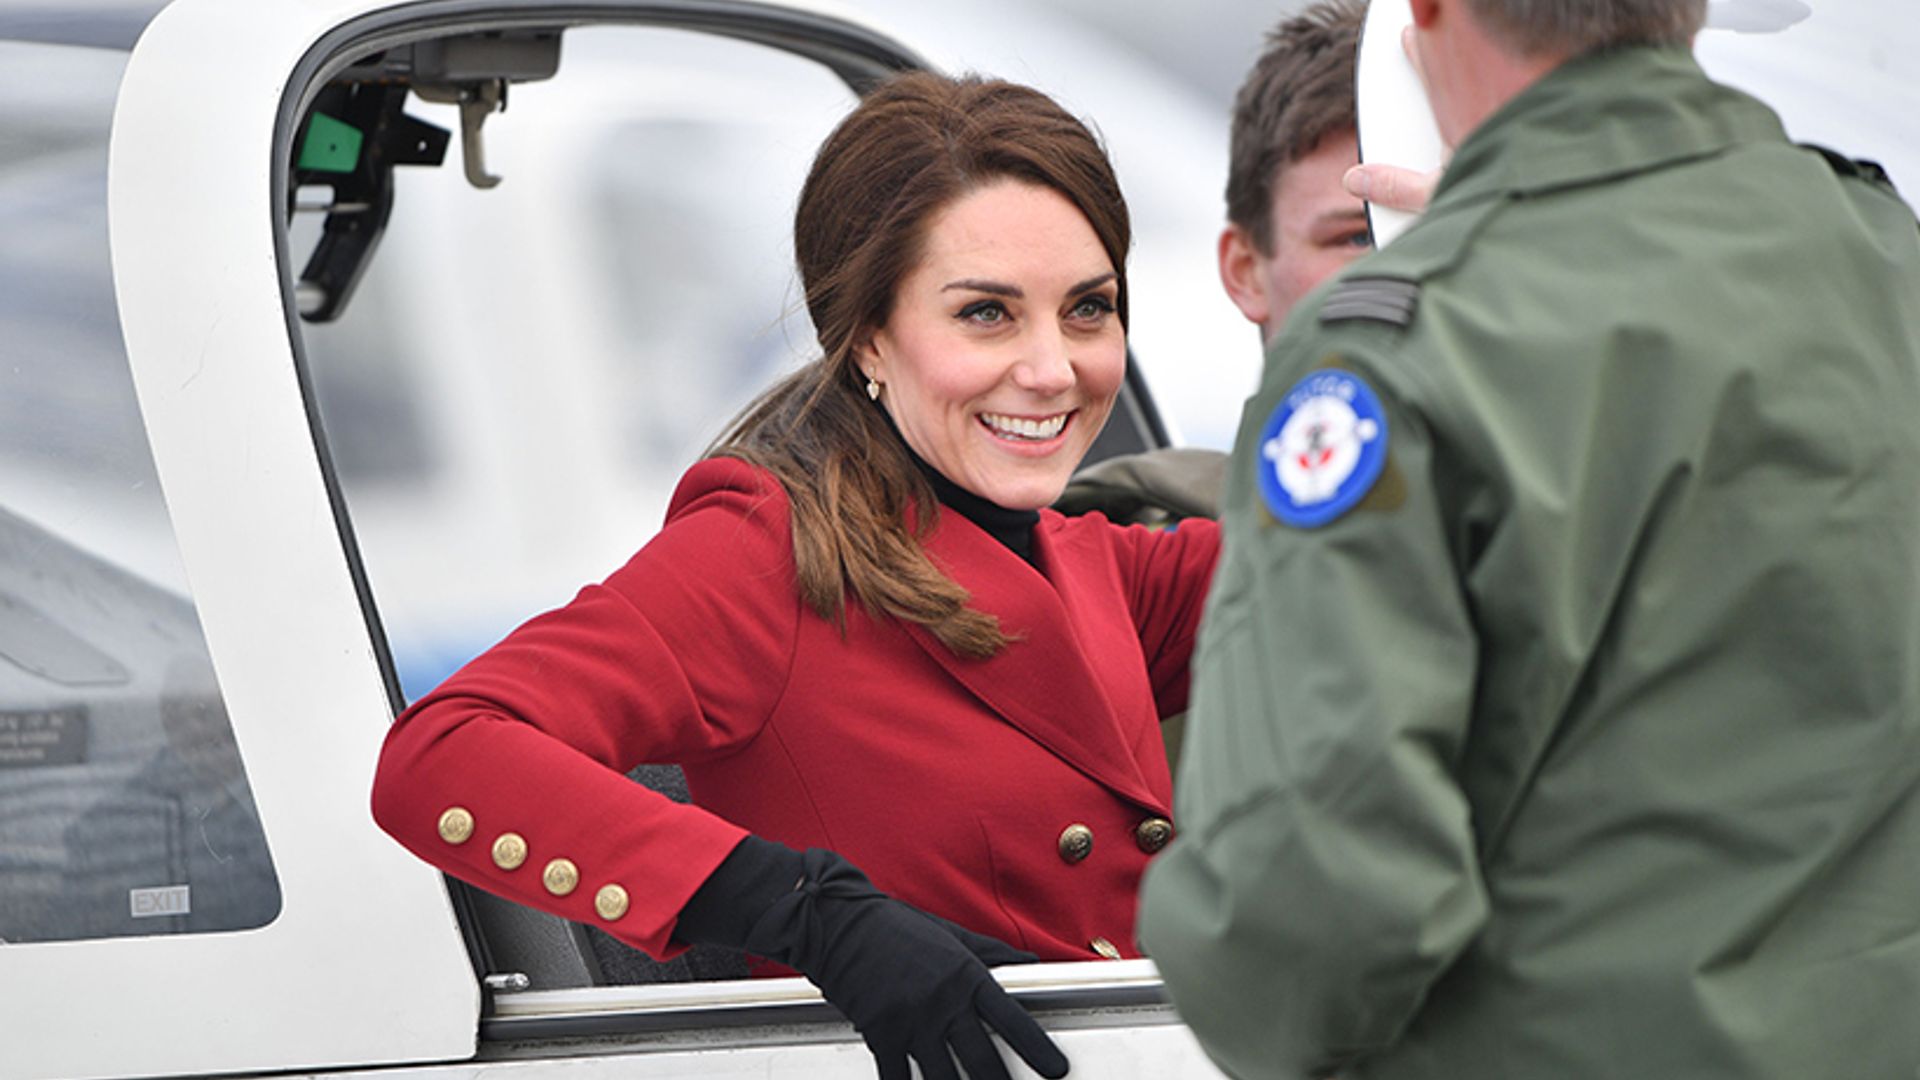 Kate told she's a 'natural' as she tries out flight simulator  